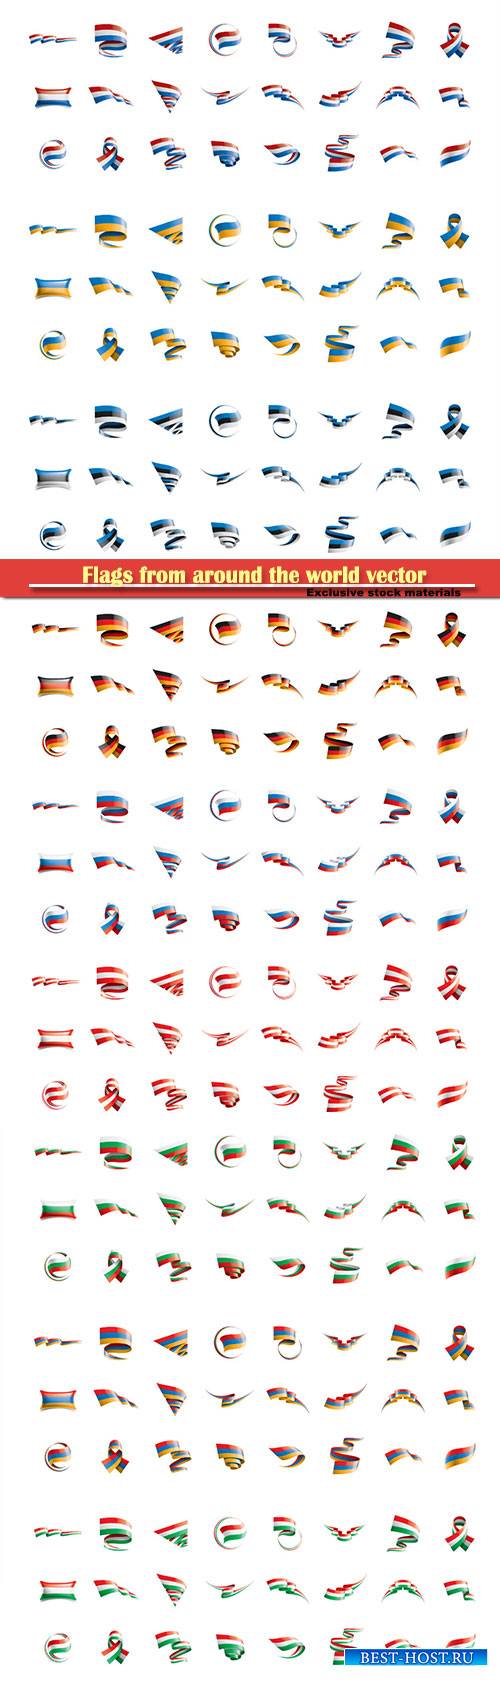 Flags from around the world vector illustration